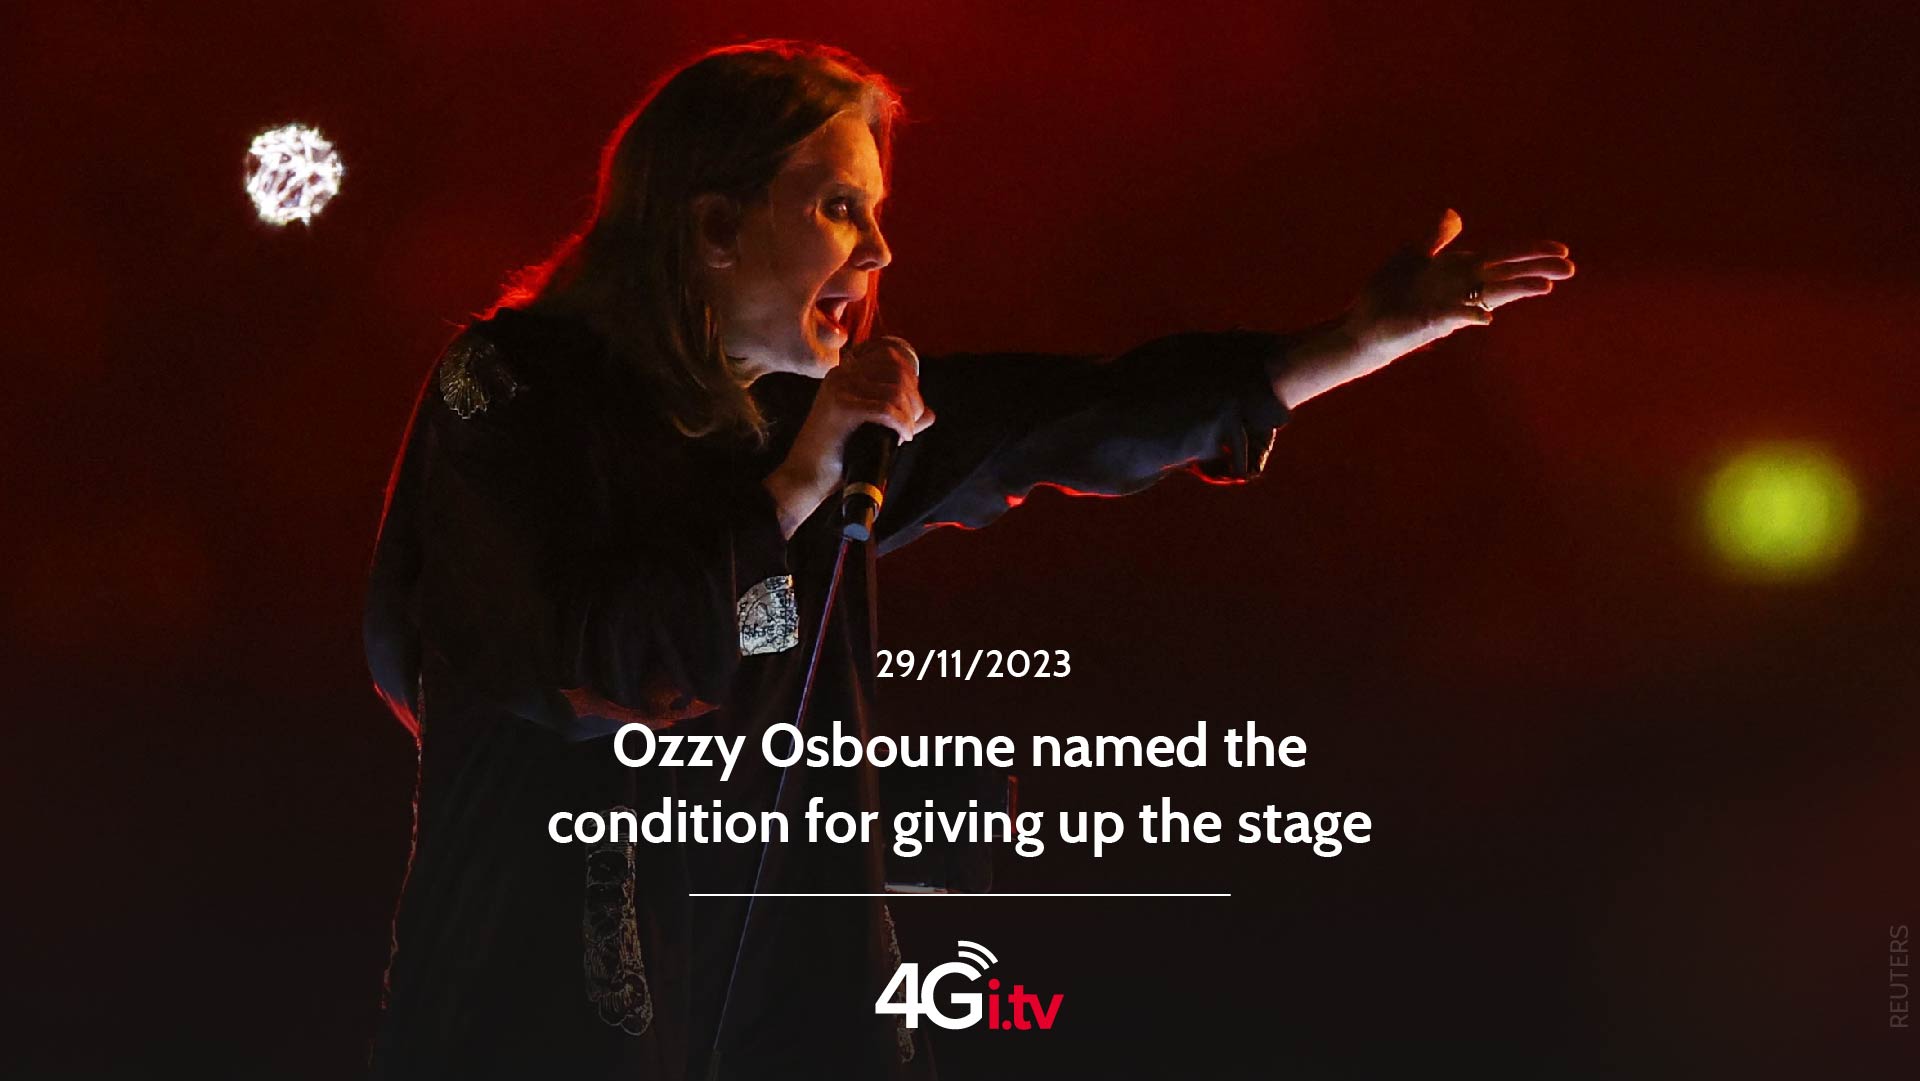 Подробнее о статье Ozzy Osbourne named the condition for giving up the stage